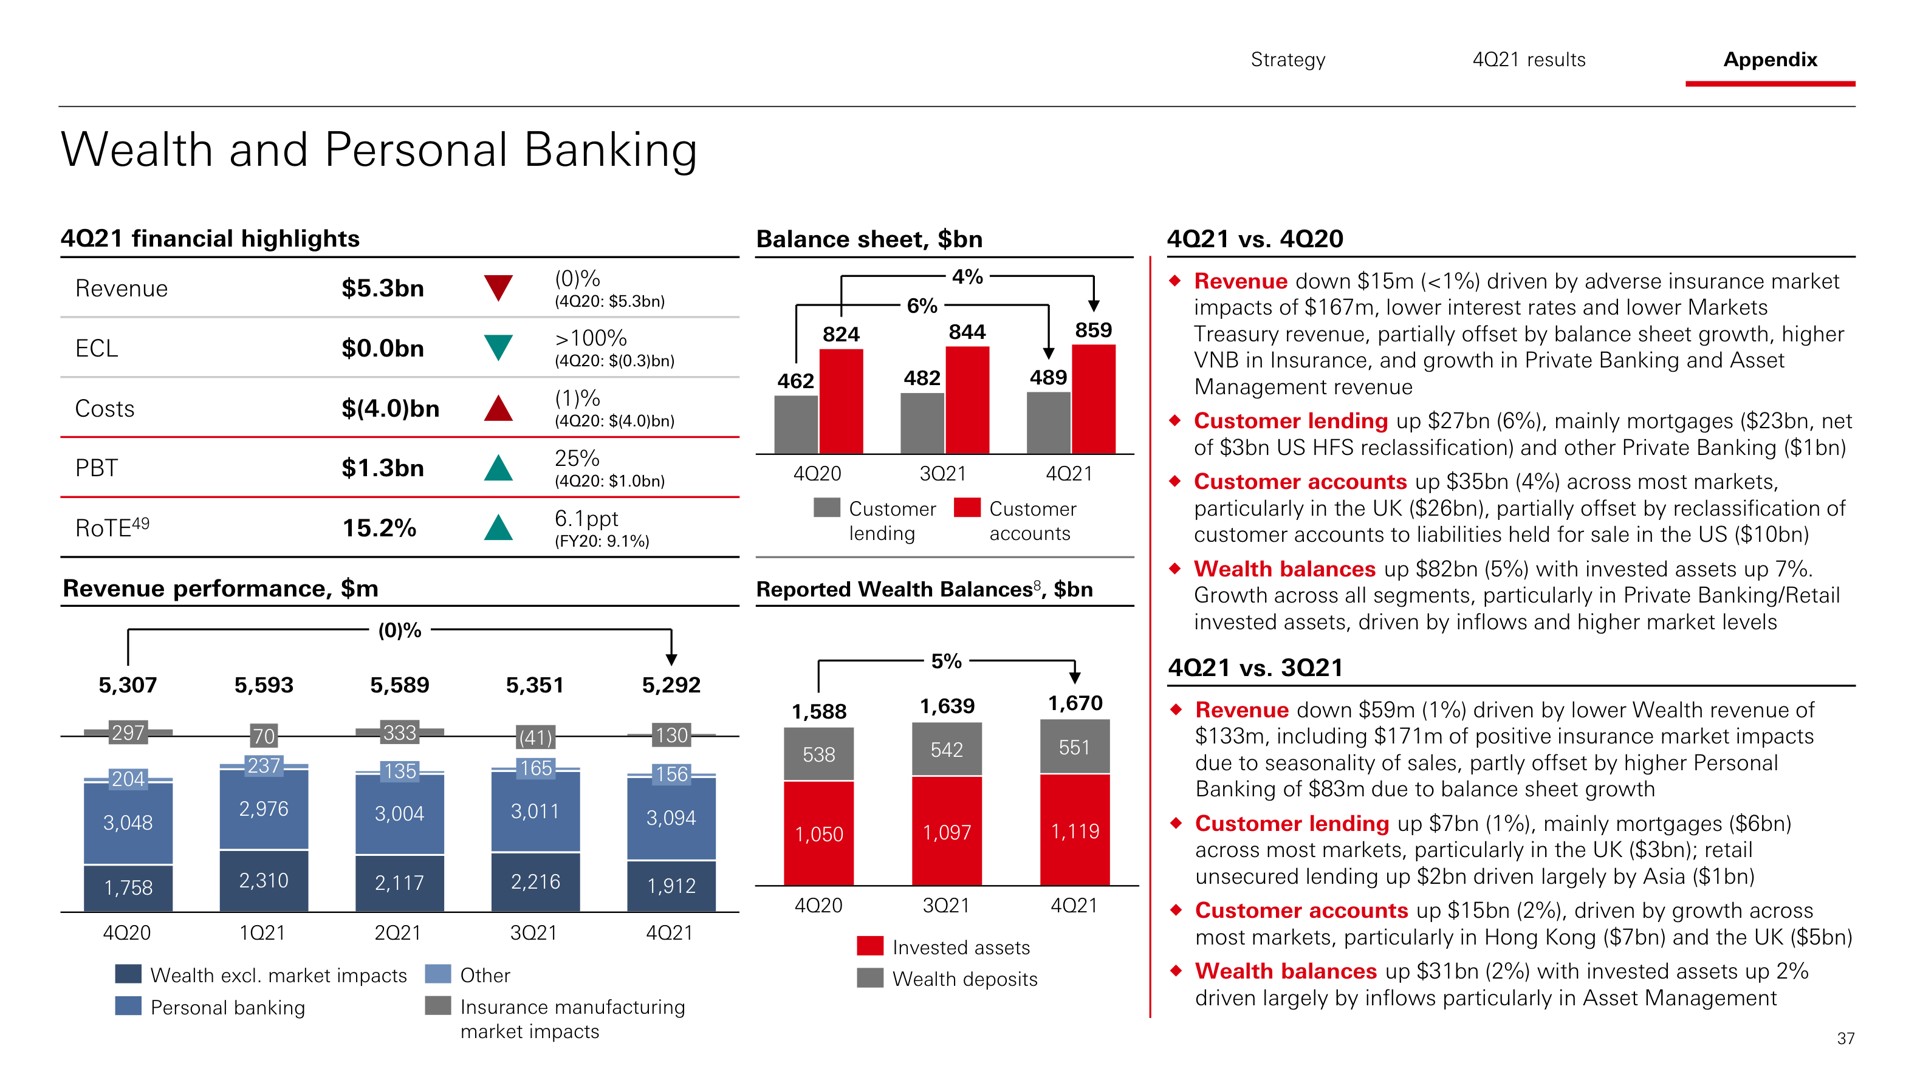 wealth and personal banking | HSBC